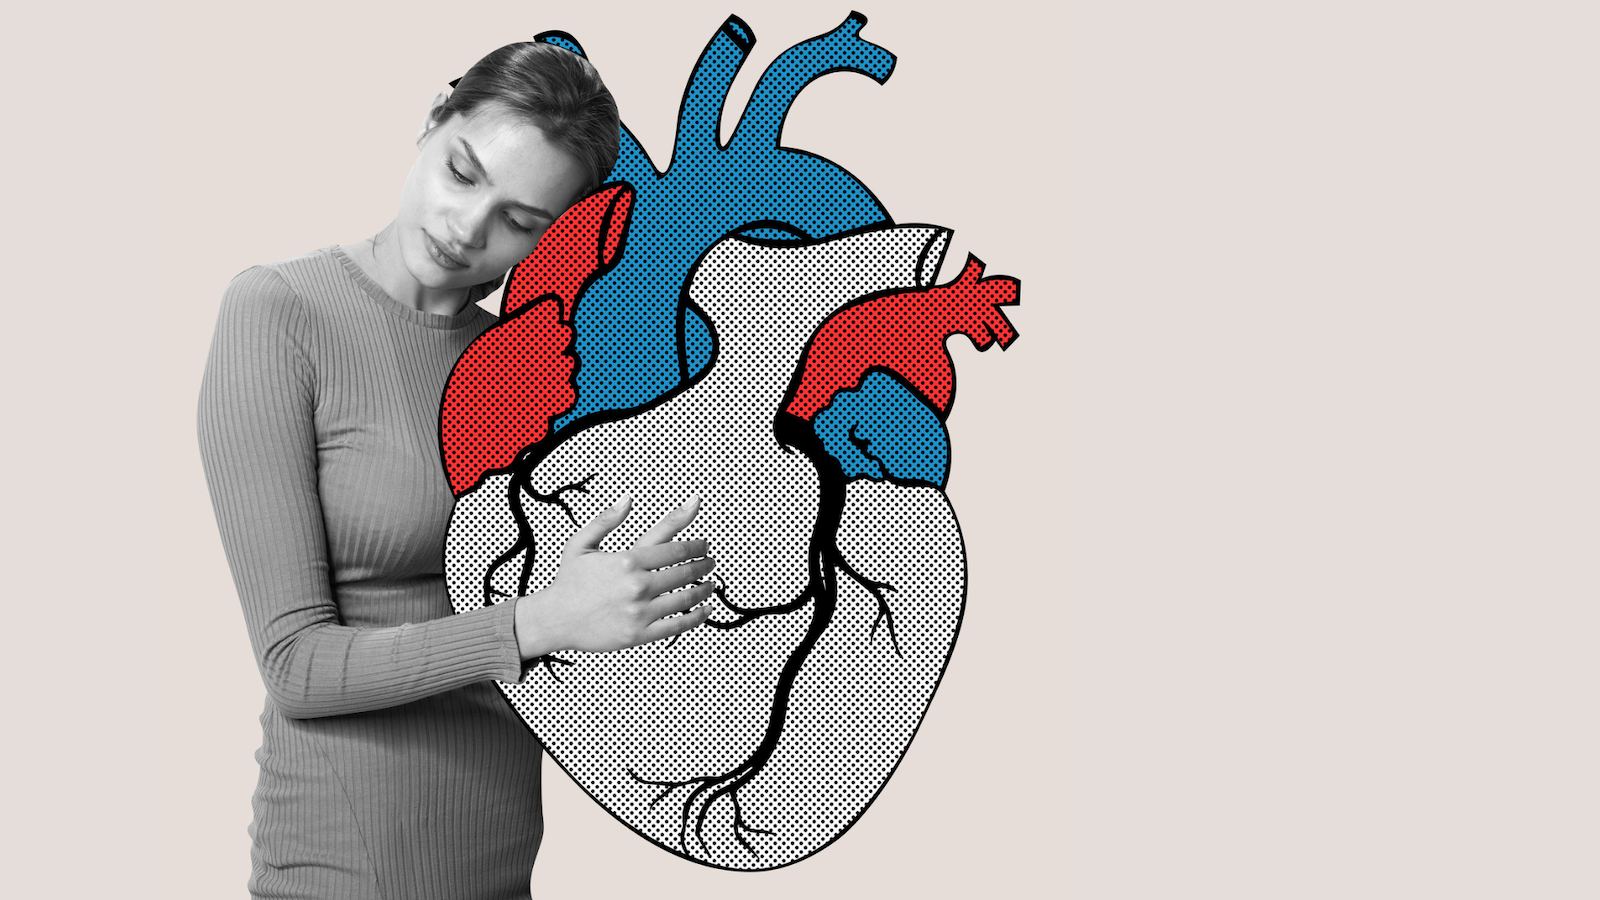 We've gotten really good in the last 50 years at treatment strategies that work for the male pattern heart disease, but women may be getting less benefit. GETTY